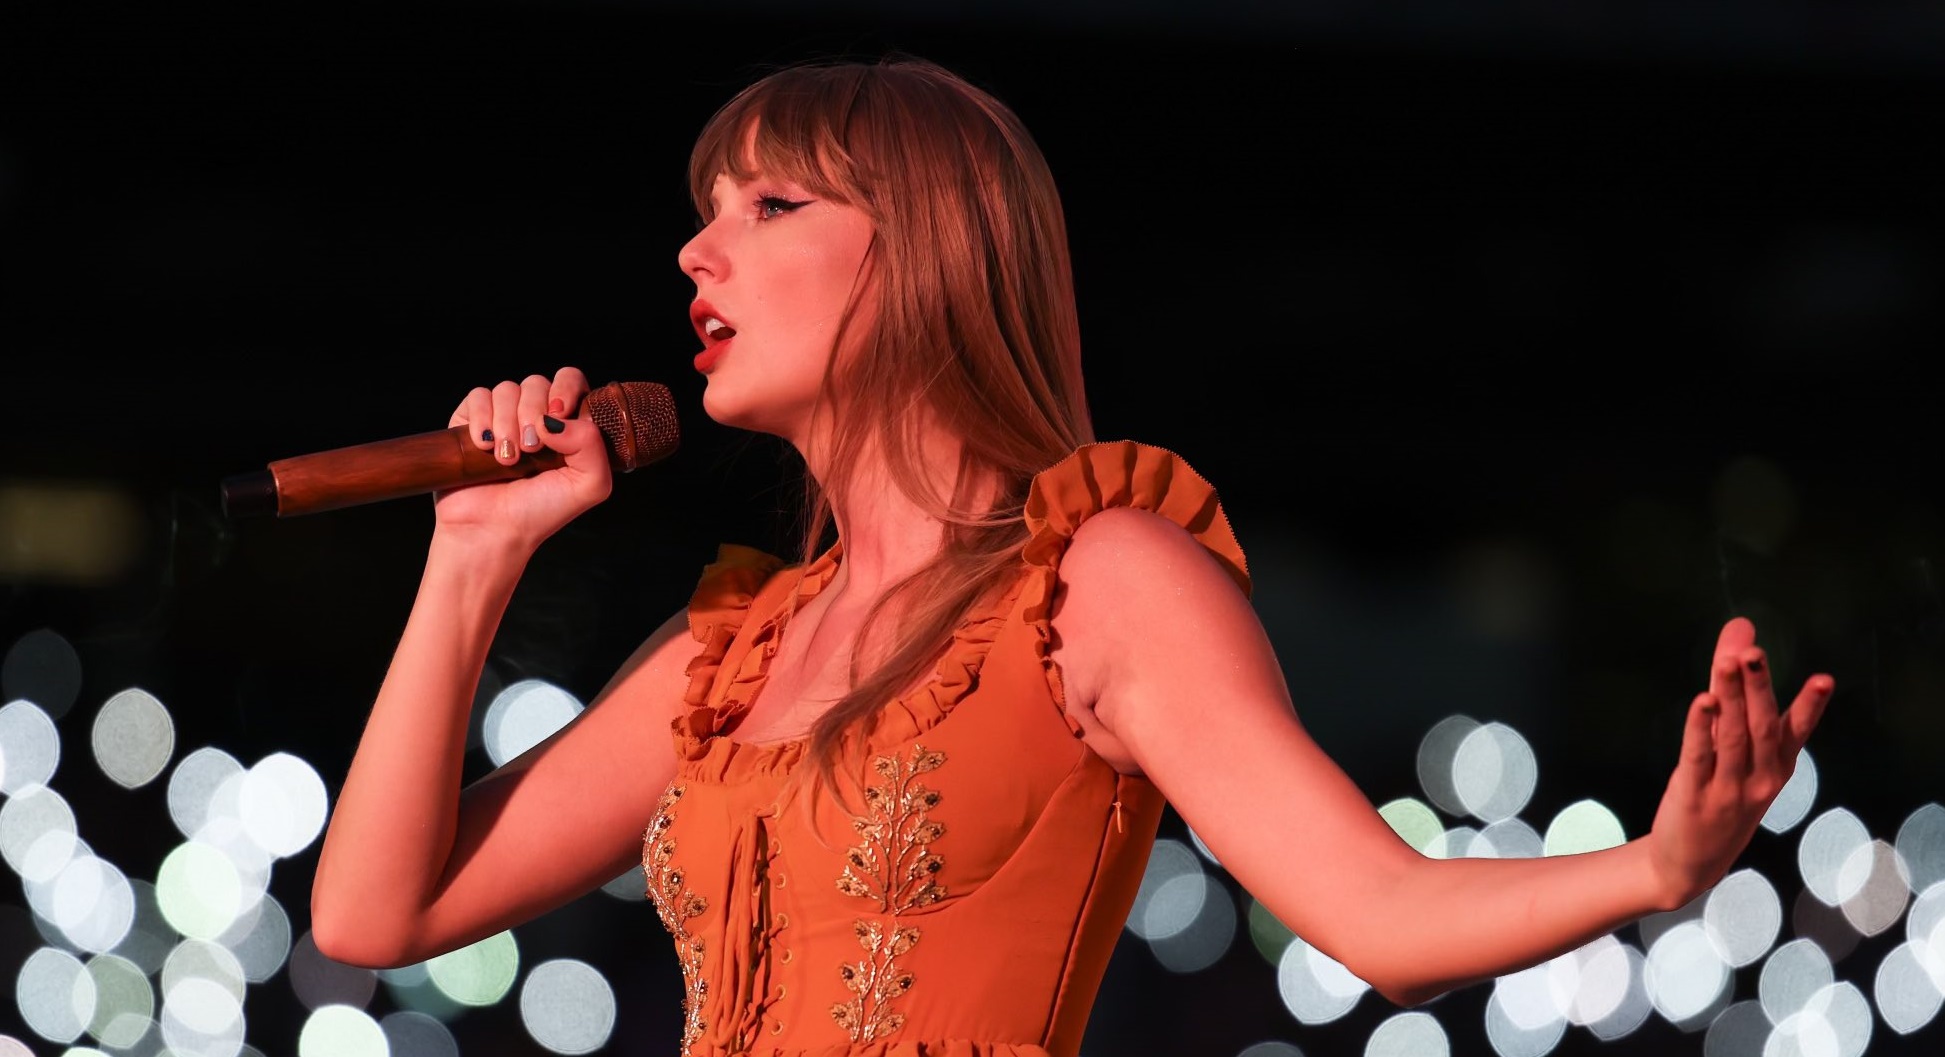 Finally, Taylor Swift coming to Canada, but adds only Toronto to her Eras Tour